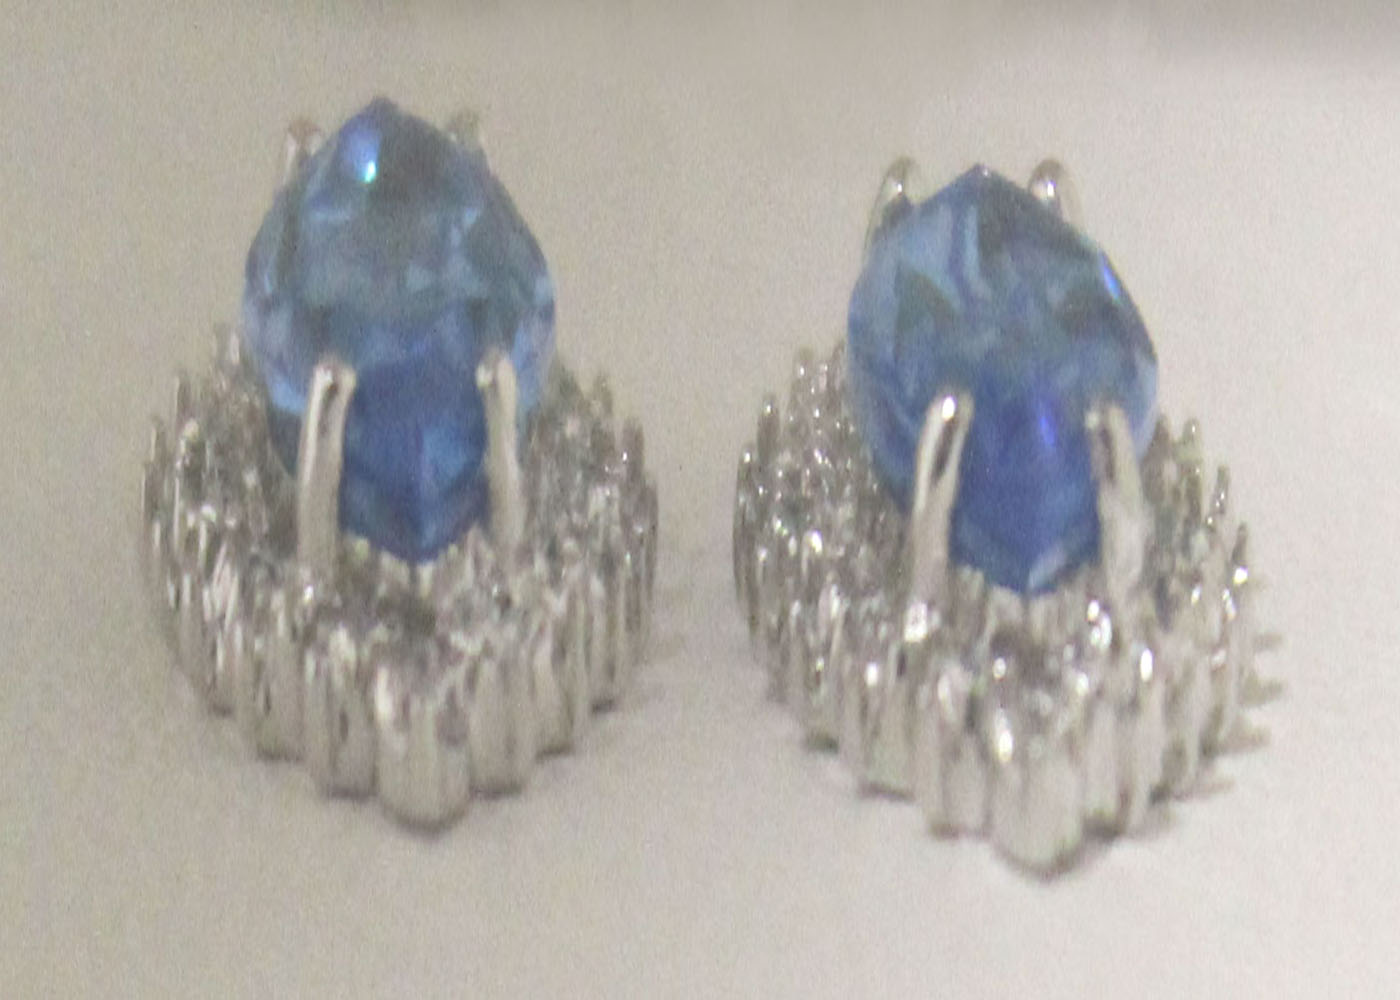 9ct White Gold Diamond and Blue Topaz Earring (BT3.73) 0.02 Carats - Image 5 of 6